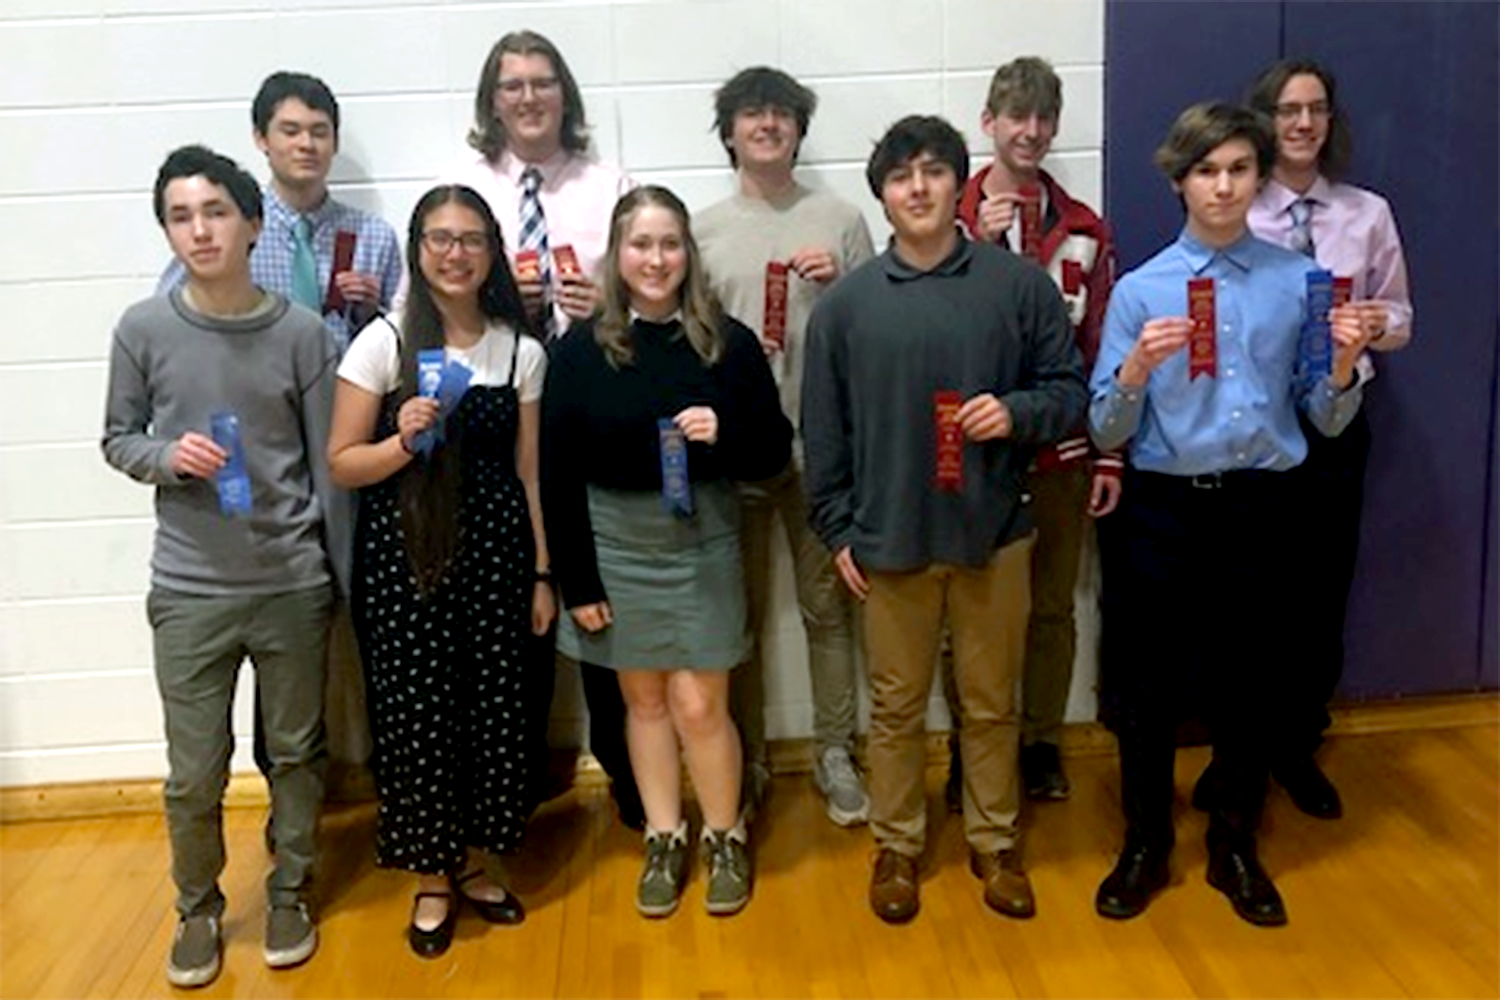 eGaming Champions Crowned At Catonsville High School Event - PressBox